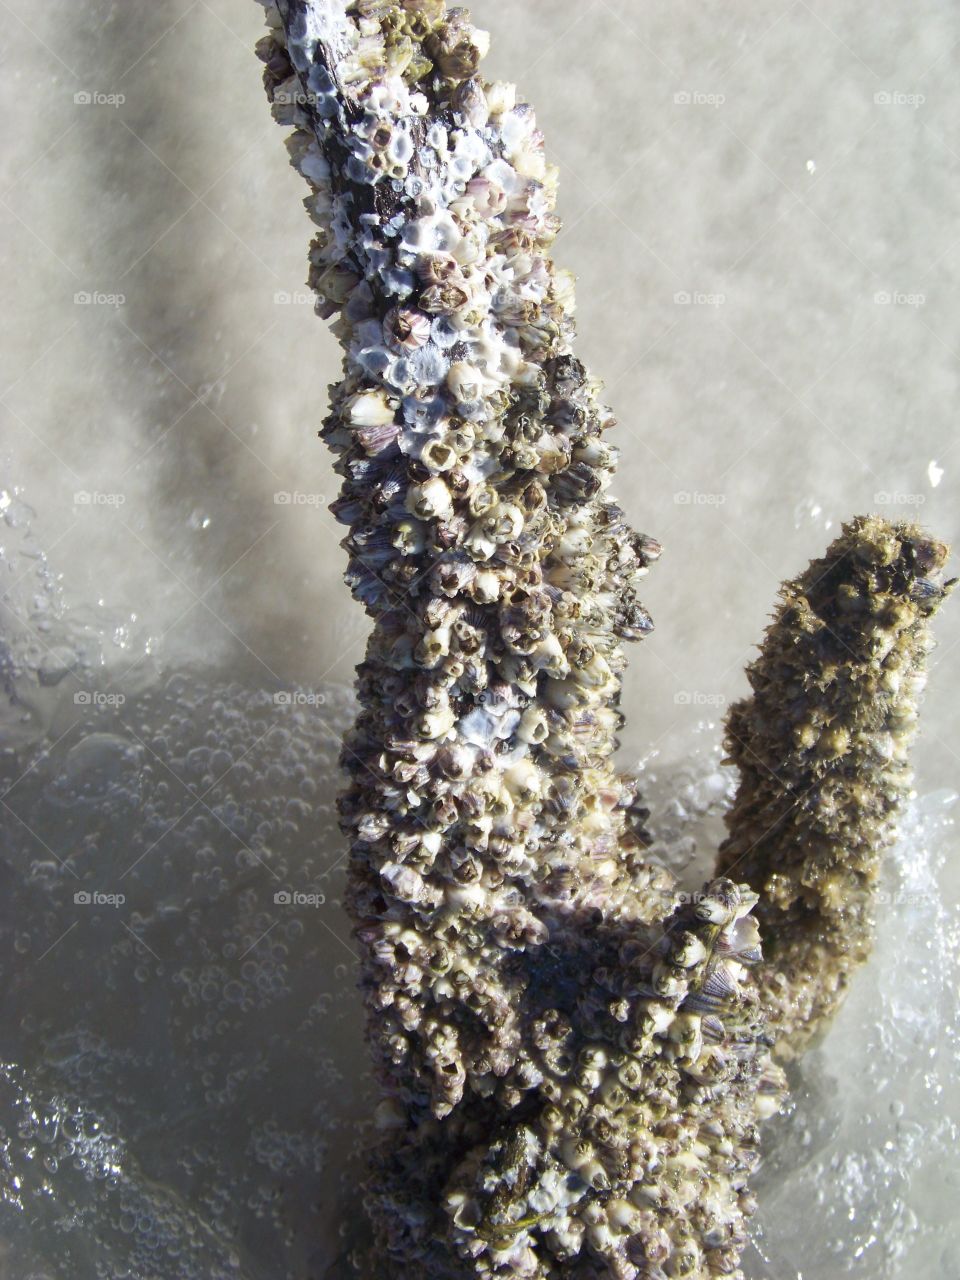 Barnacles on driftwood in the ocean